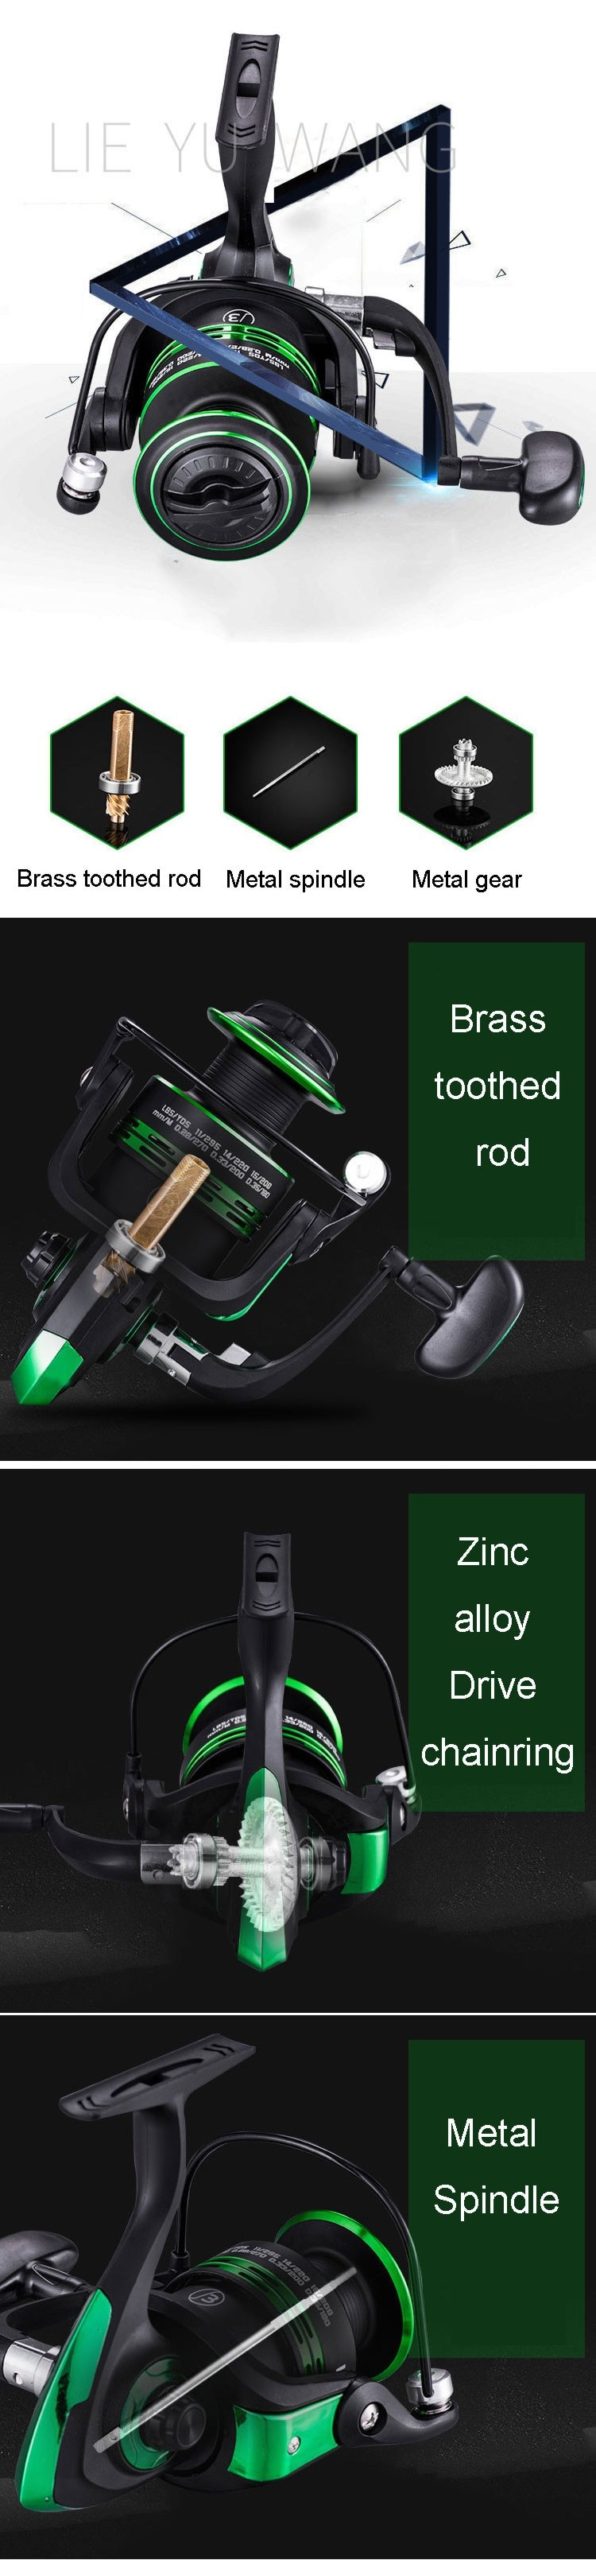 2020 new Metal Spool Spinning Reel Spinning Fishing reel Free spare line cup Spare Spool Left / right hand fishing wheel